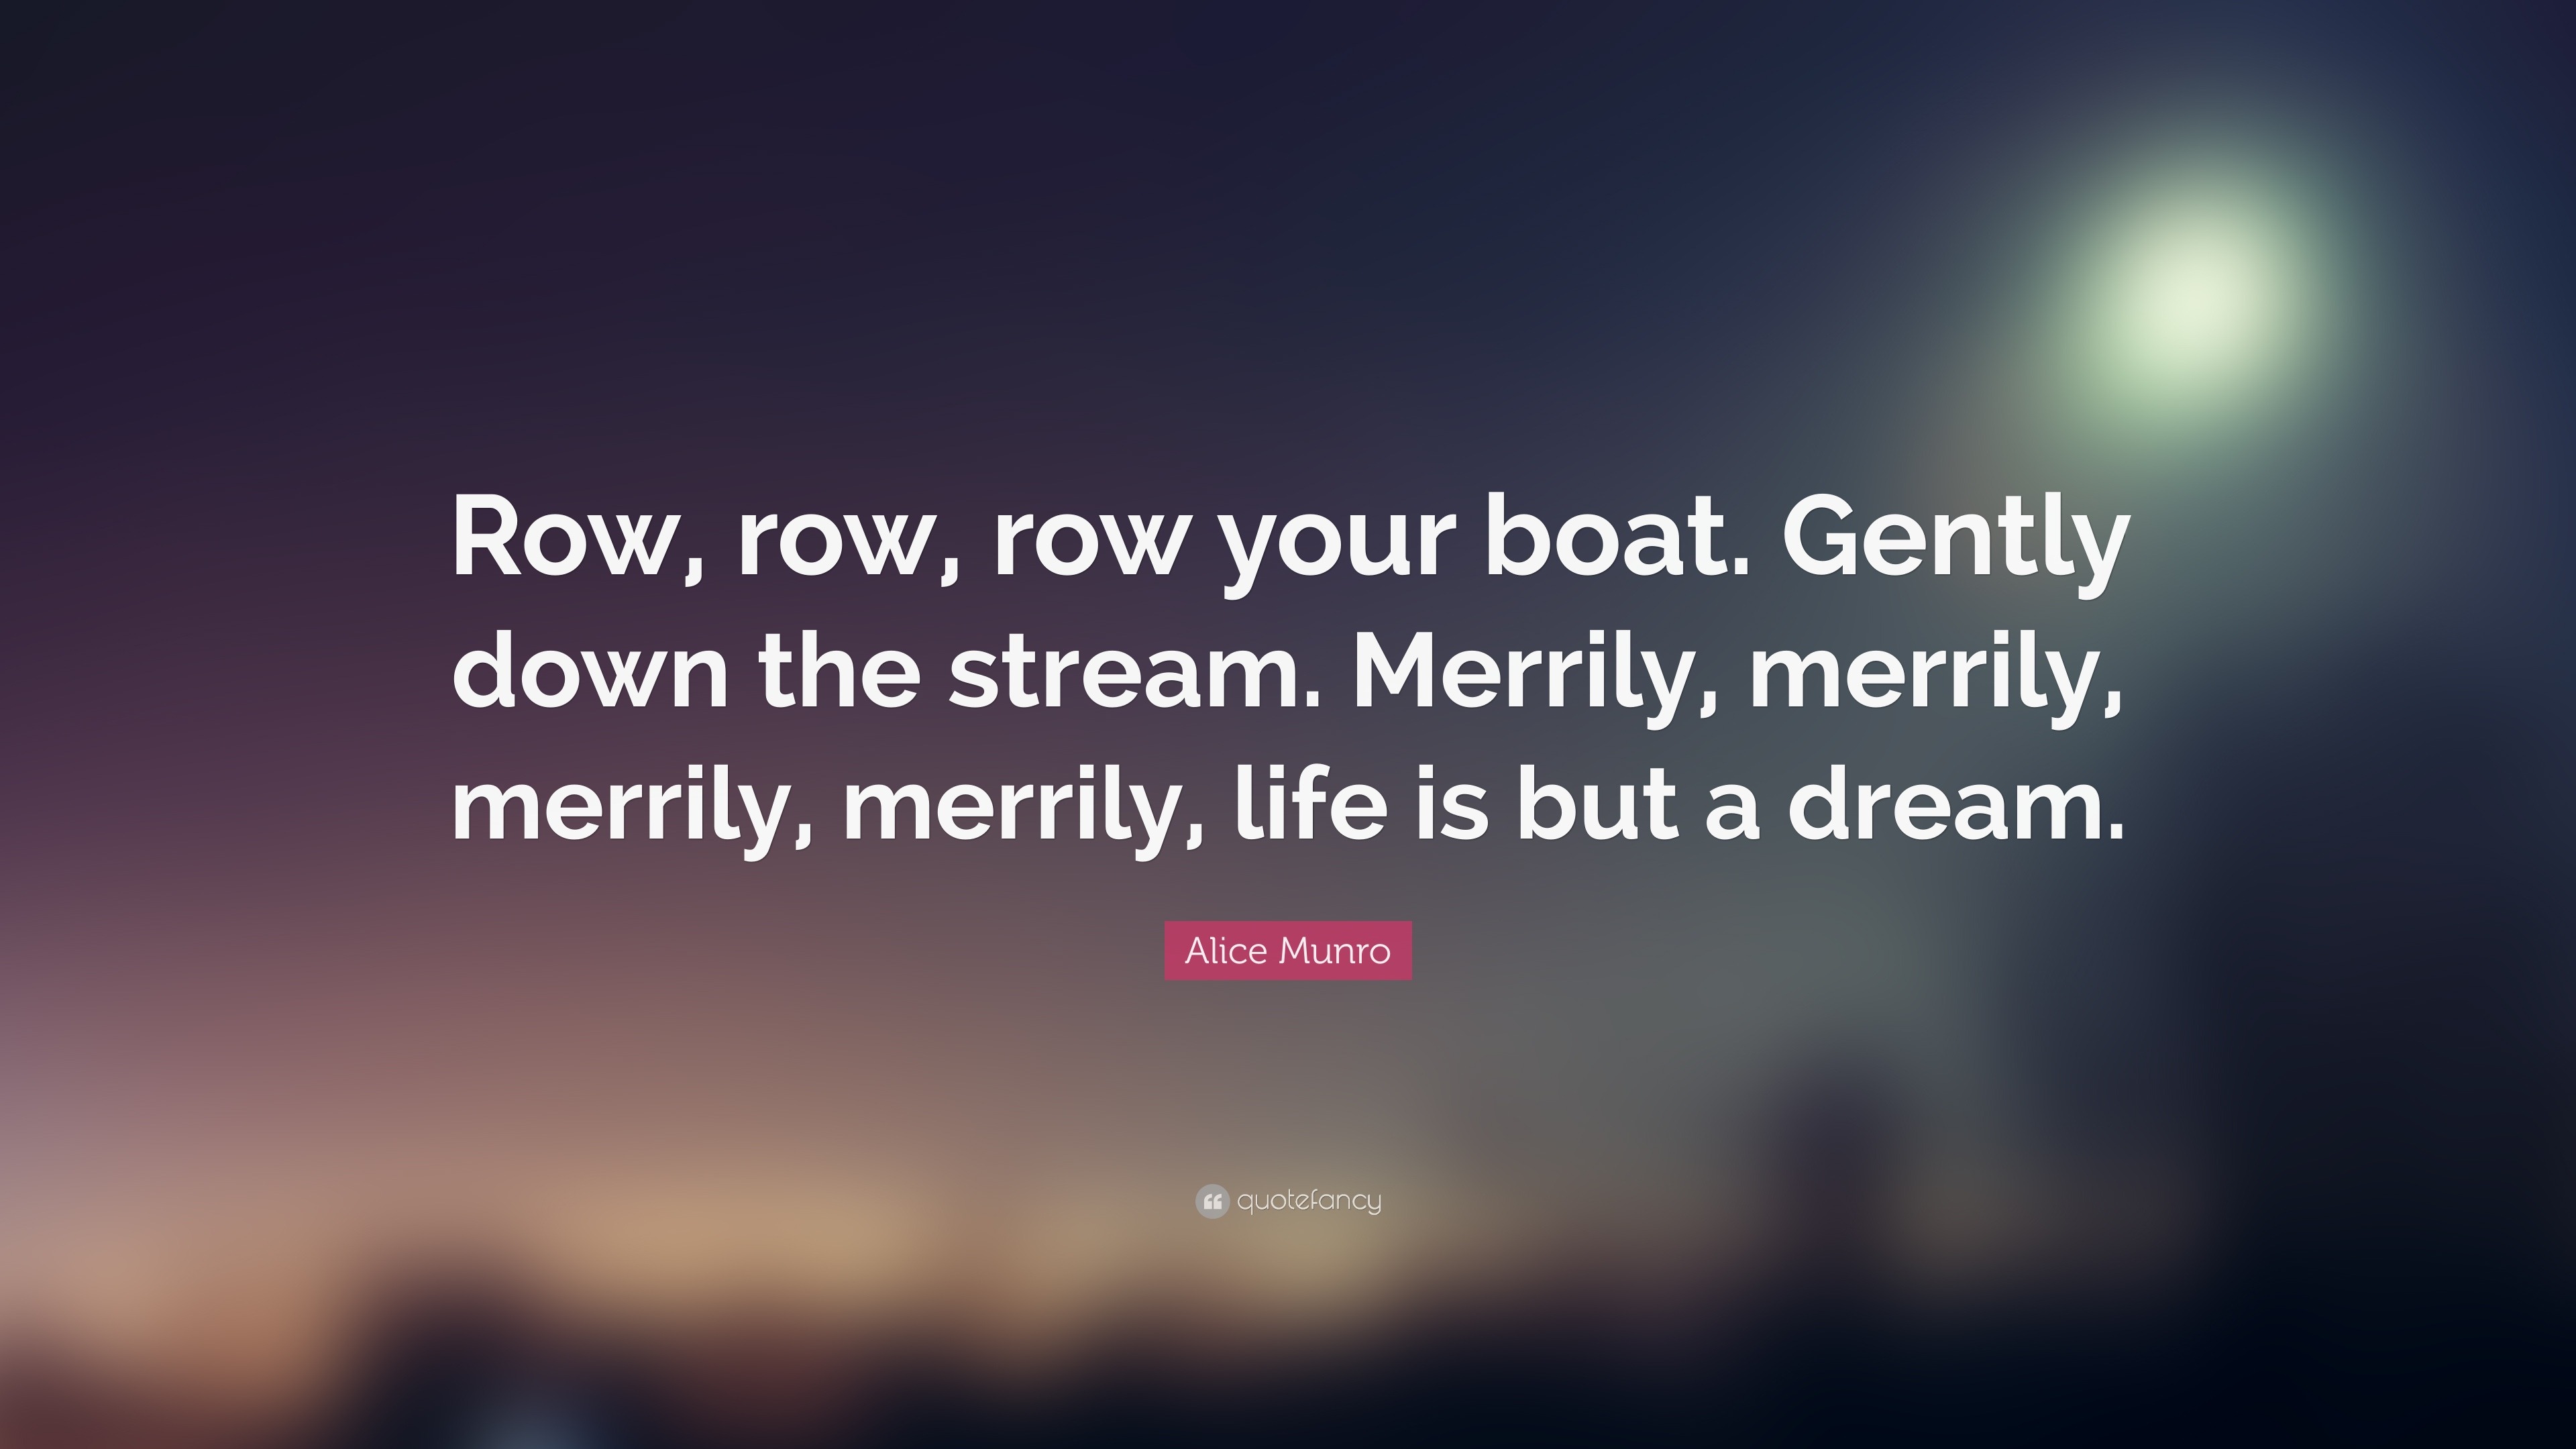 Row row row your boat life is but a dream Alice Munro Quote Row Row Row Your Boat Gently Down The Stream Merrily Merrily Merrily Merrily